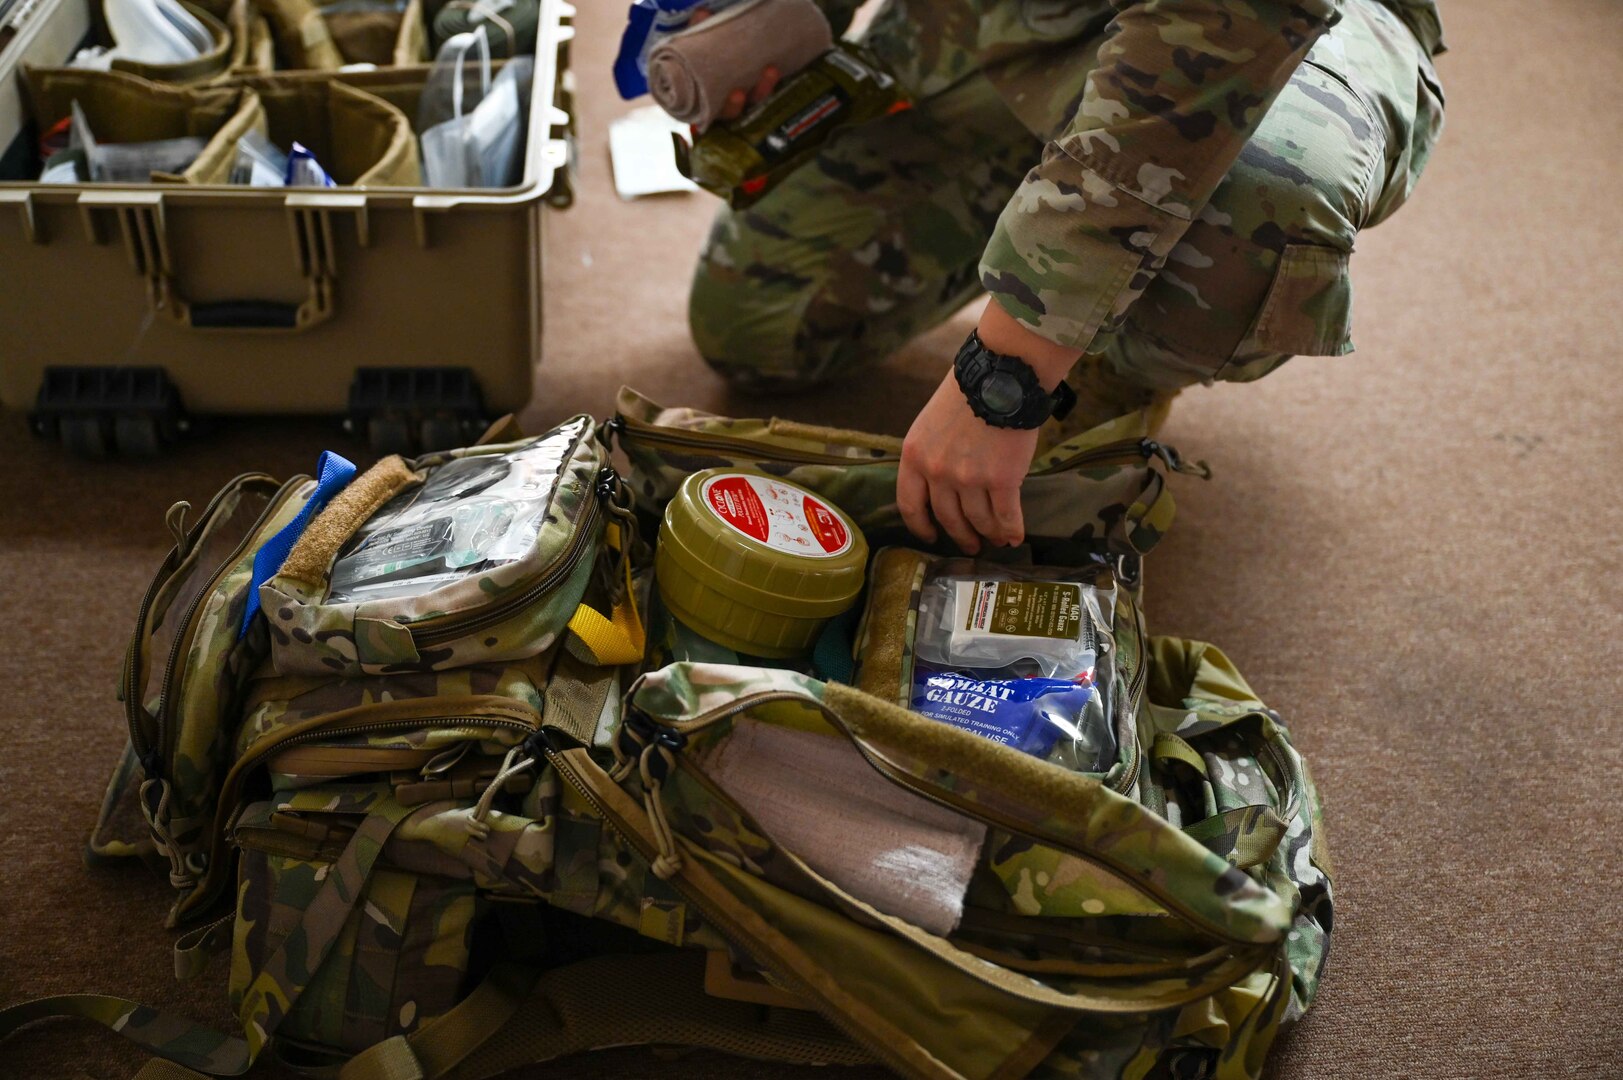 U.S. Air Force Staff Sgt. Rebekah Clifford, 82nd Medical Group independent duty medical technician, packs her bag in preparation for the Caduceus Spear exercise at Clinton Sherman Airfield Park, Oklahoma, Oct. 26, 2023. The scenario for the exercise was meant to simulate how to give life-saving care to several blast victims before air evacuation arrives. (U.S. Air Force photo by Airman 1st Class Kari Degraffenreed)